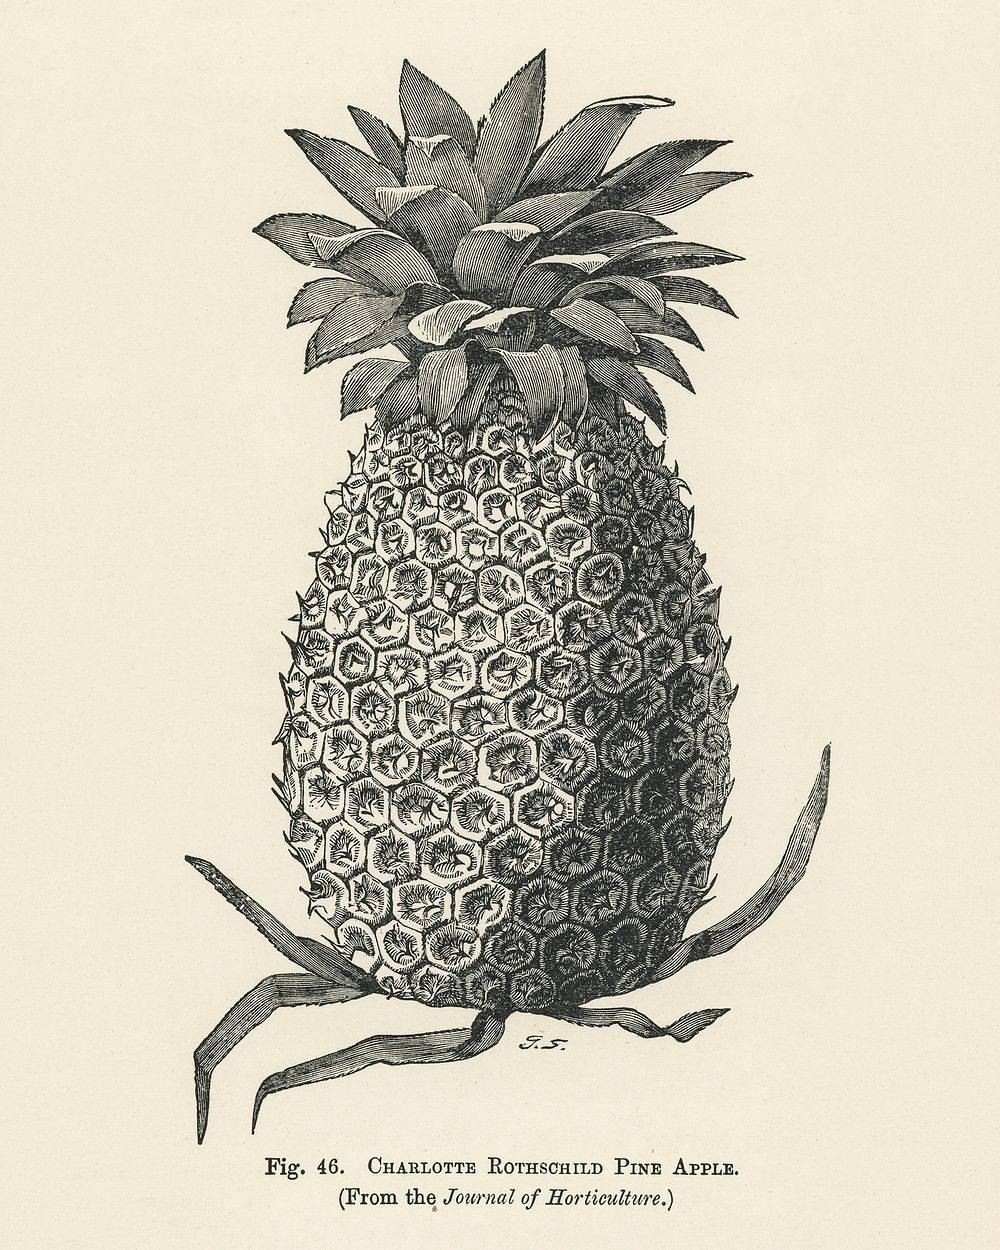 Vintage illustration of charlotte rothschild pineapple digitally enhanced from our own vintage edition of The Fruit Grower's…